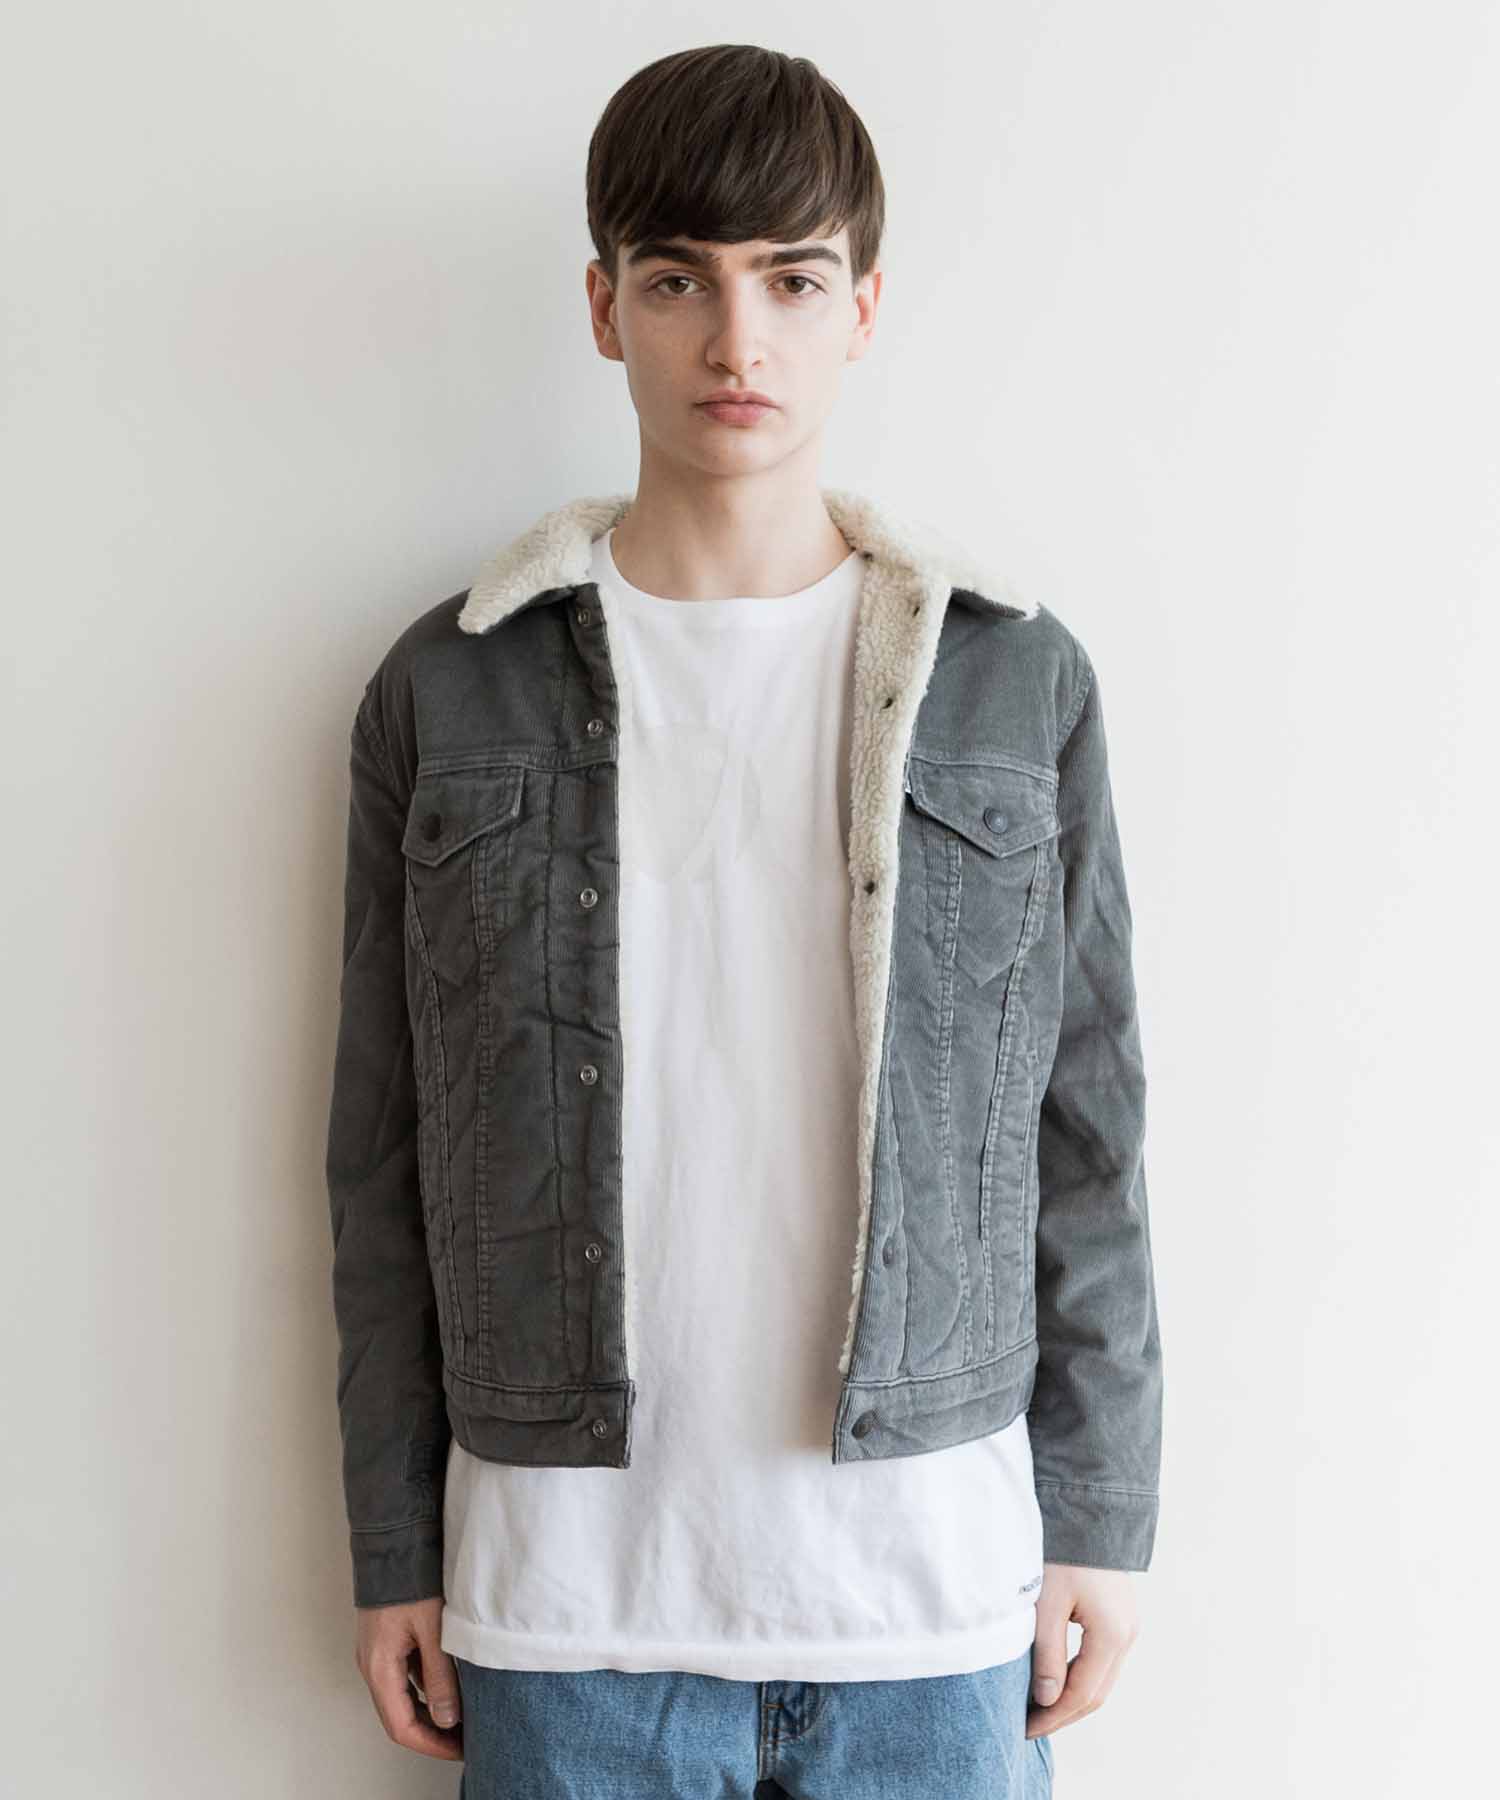 levis sherpa pewter